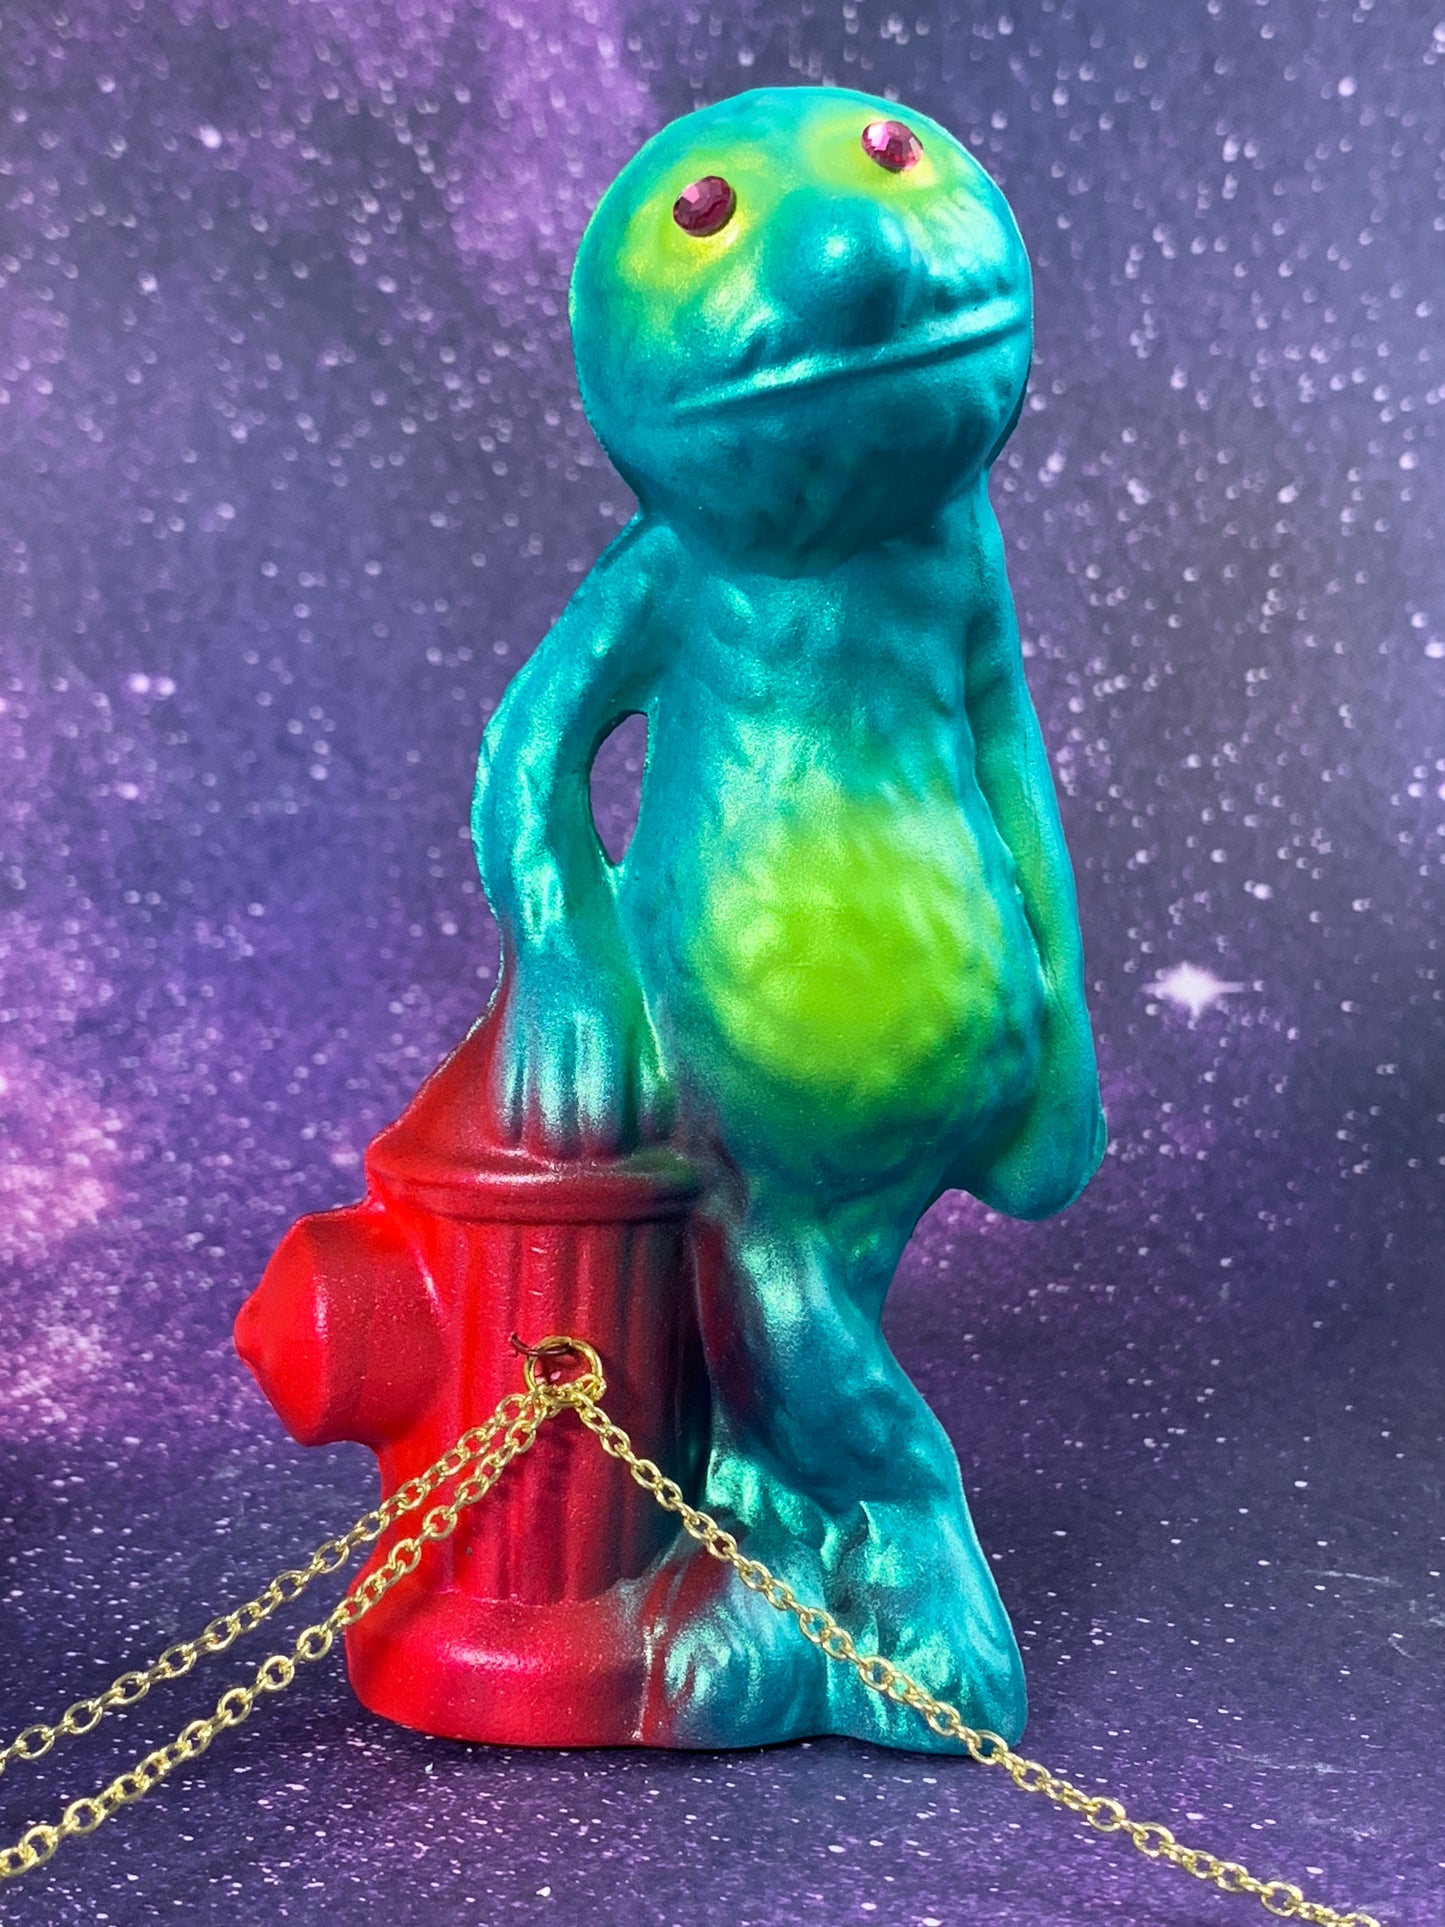 Grover Leaning on a Fire Hydrant Chained to Sports Turtles